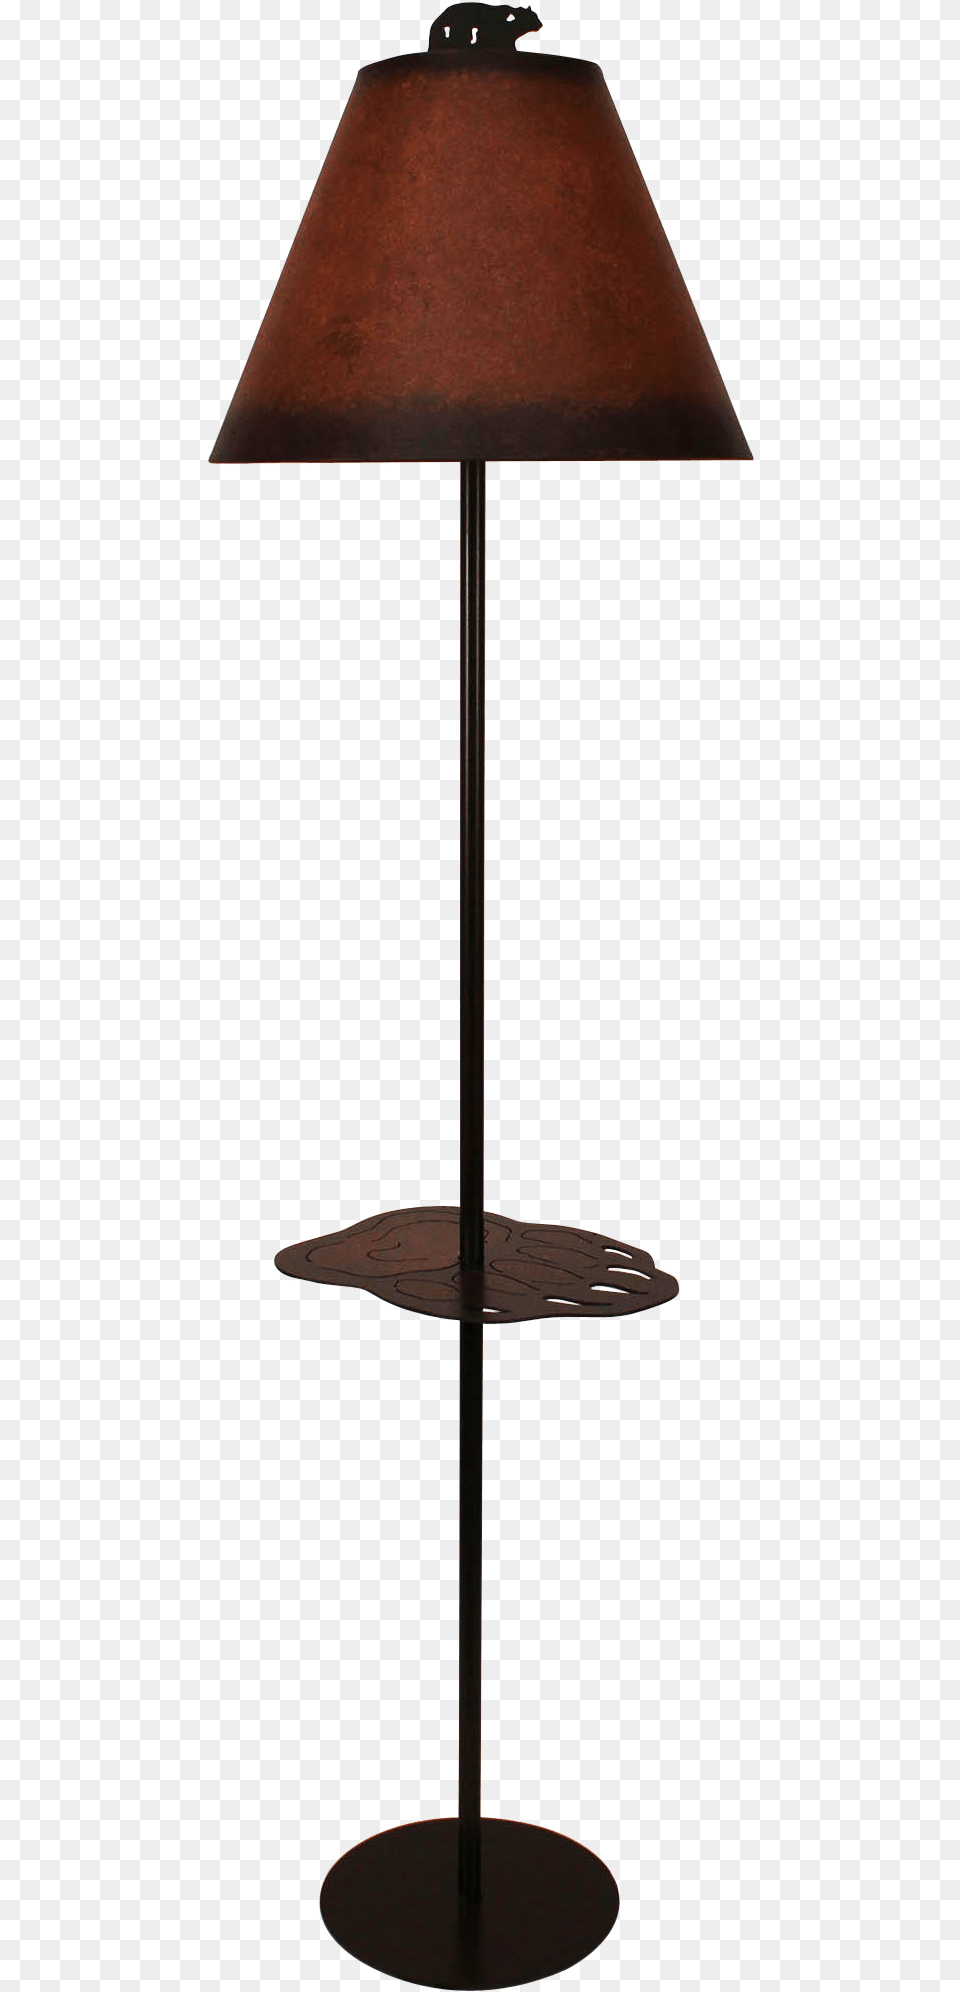 Iron Bear Paw Drink Table Tray Lamp Lampshade, Table Lamp Png Image